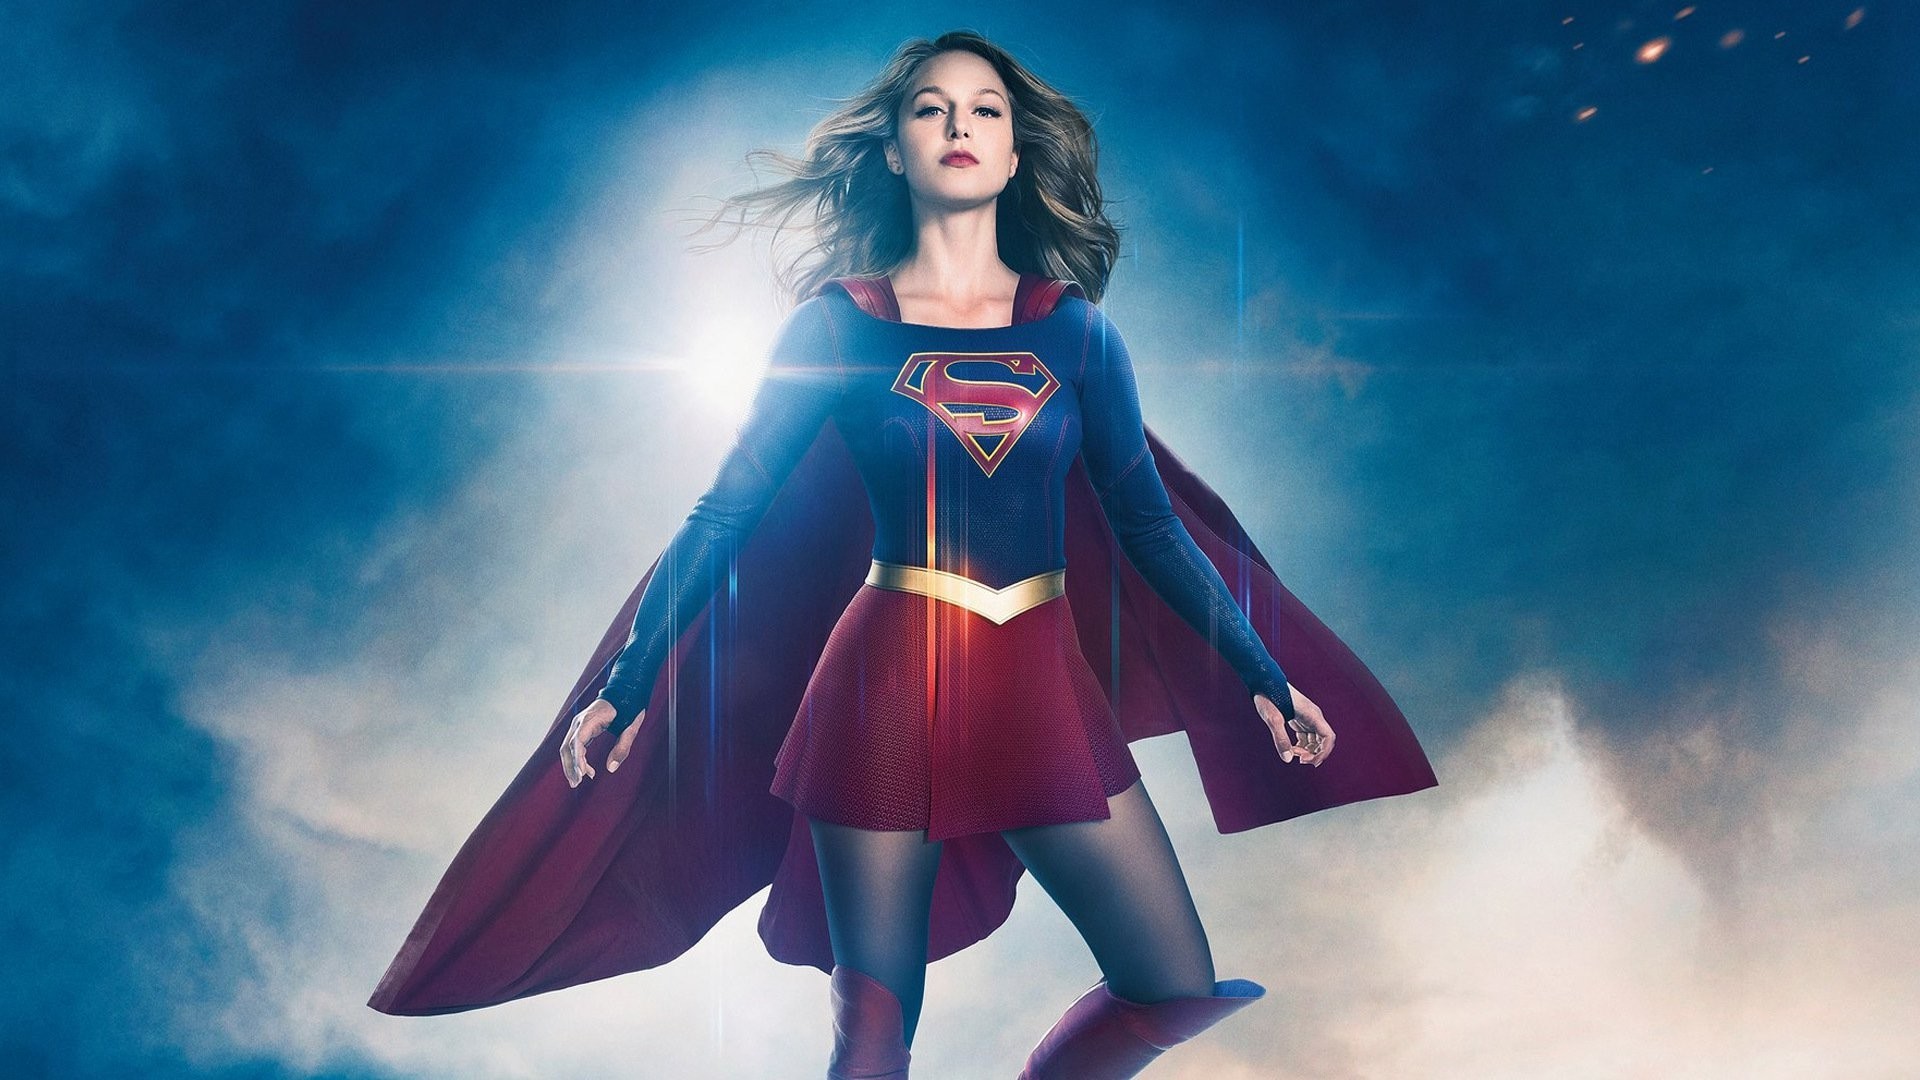 Supergirl Wallpaper with high-resolution 1920x1080 pixel. You can use this wallpaper for your Windows and Mac OS computers as well as your Android and iPhone smartphones